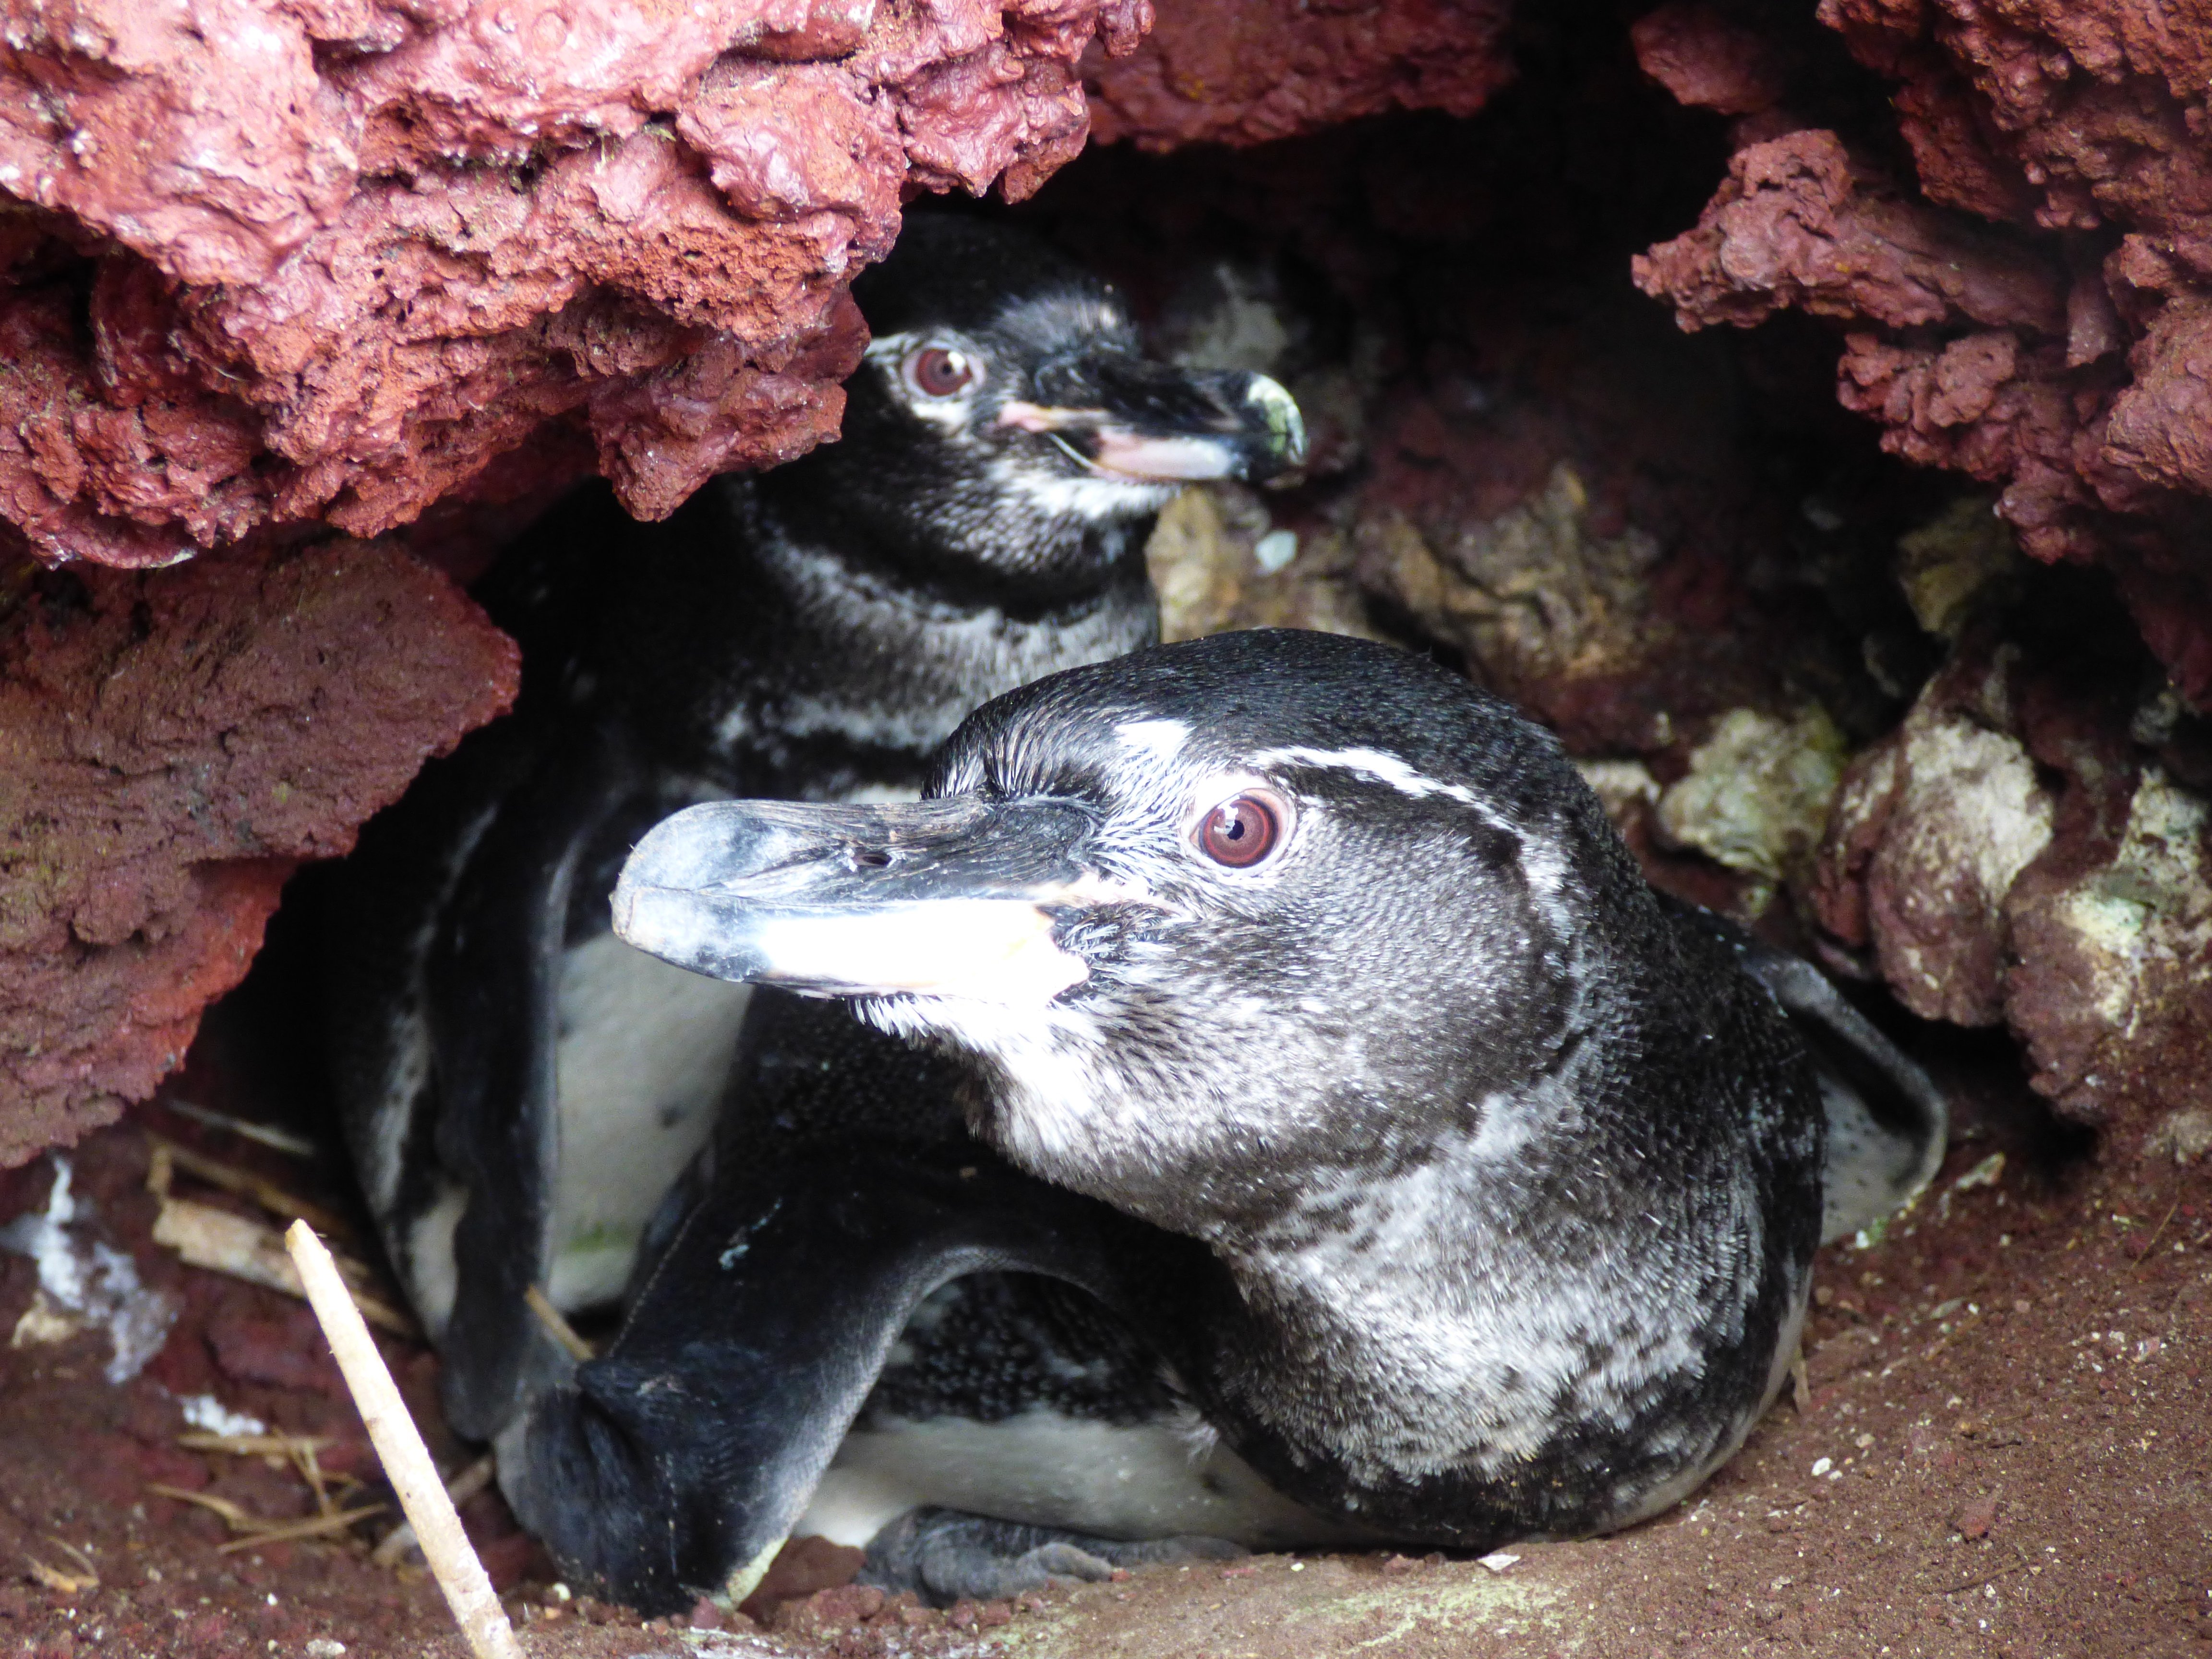 How can we help the galapagos penguin